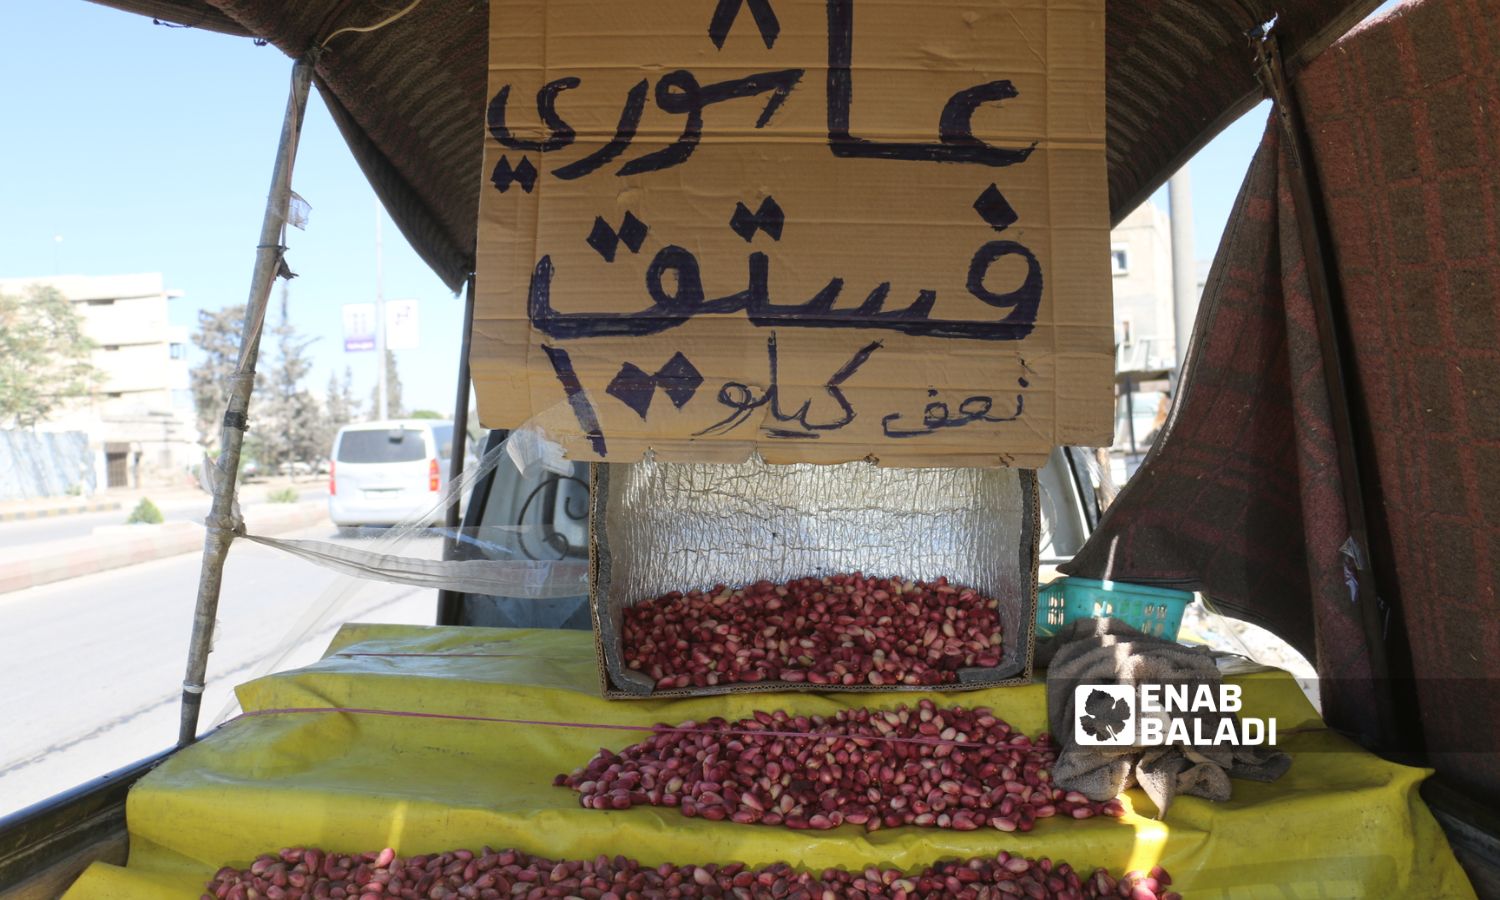 One kilo of Aleppo pistachios is sold on stalls in the Aleppo countryside for 200 Turkish liras - September 12, 2023 (Enab Baladi/Dayan Junpaz)